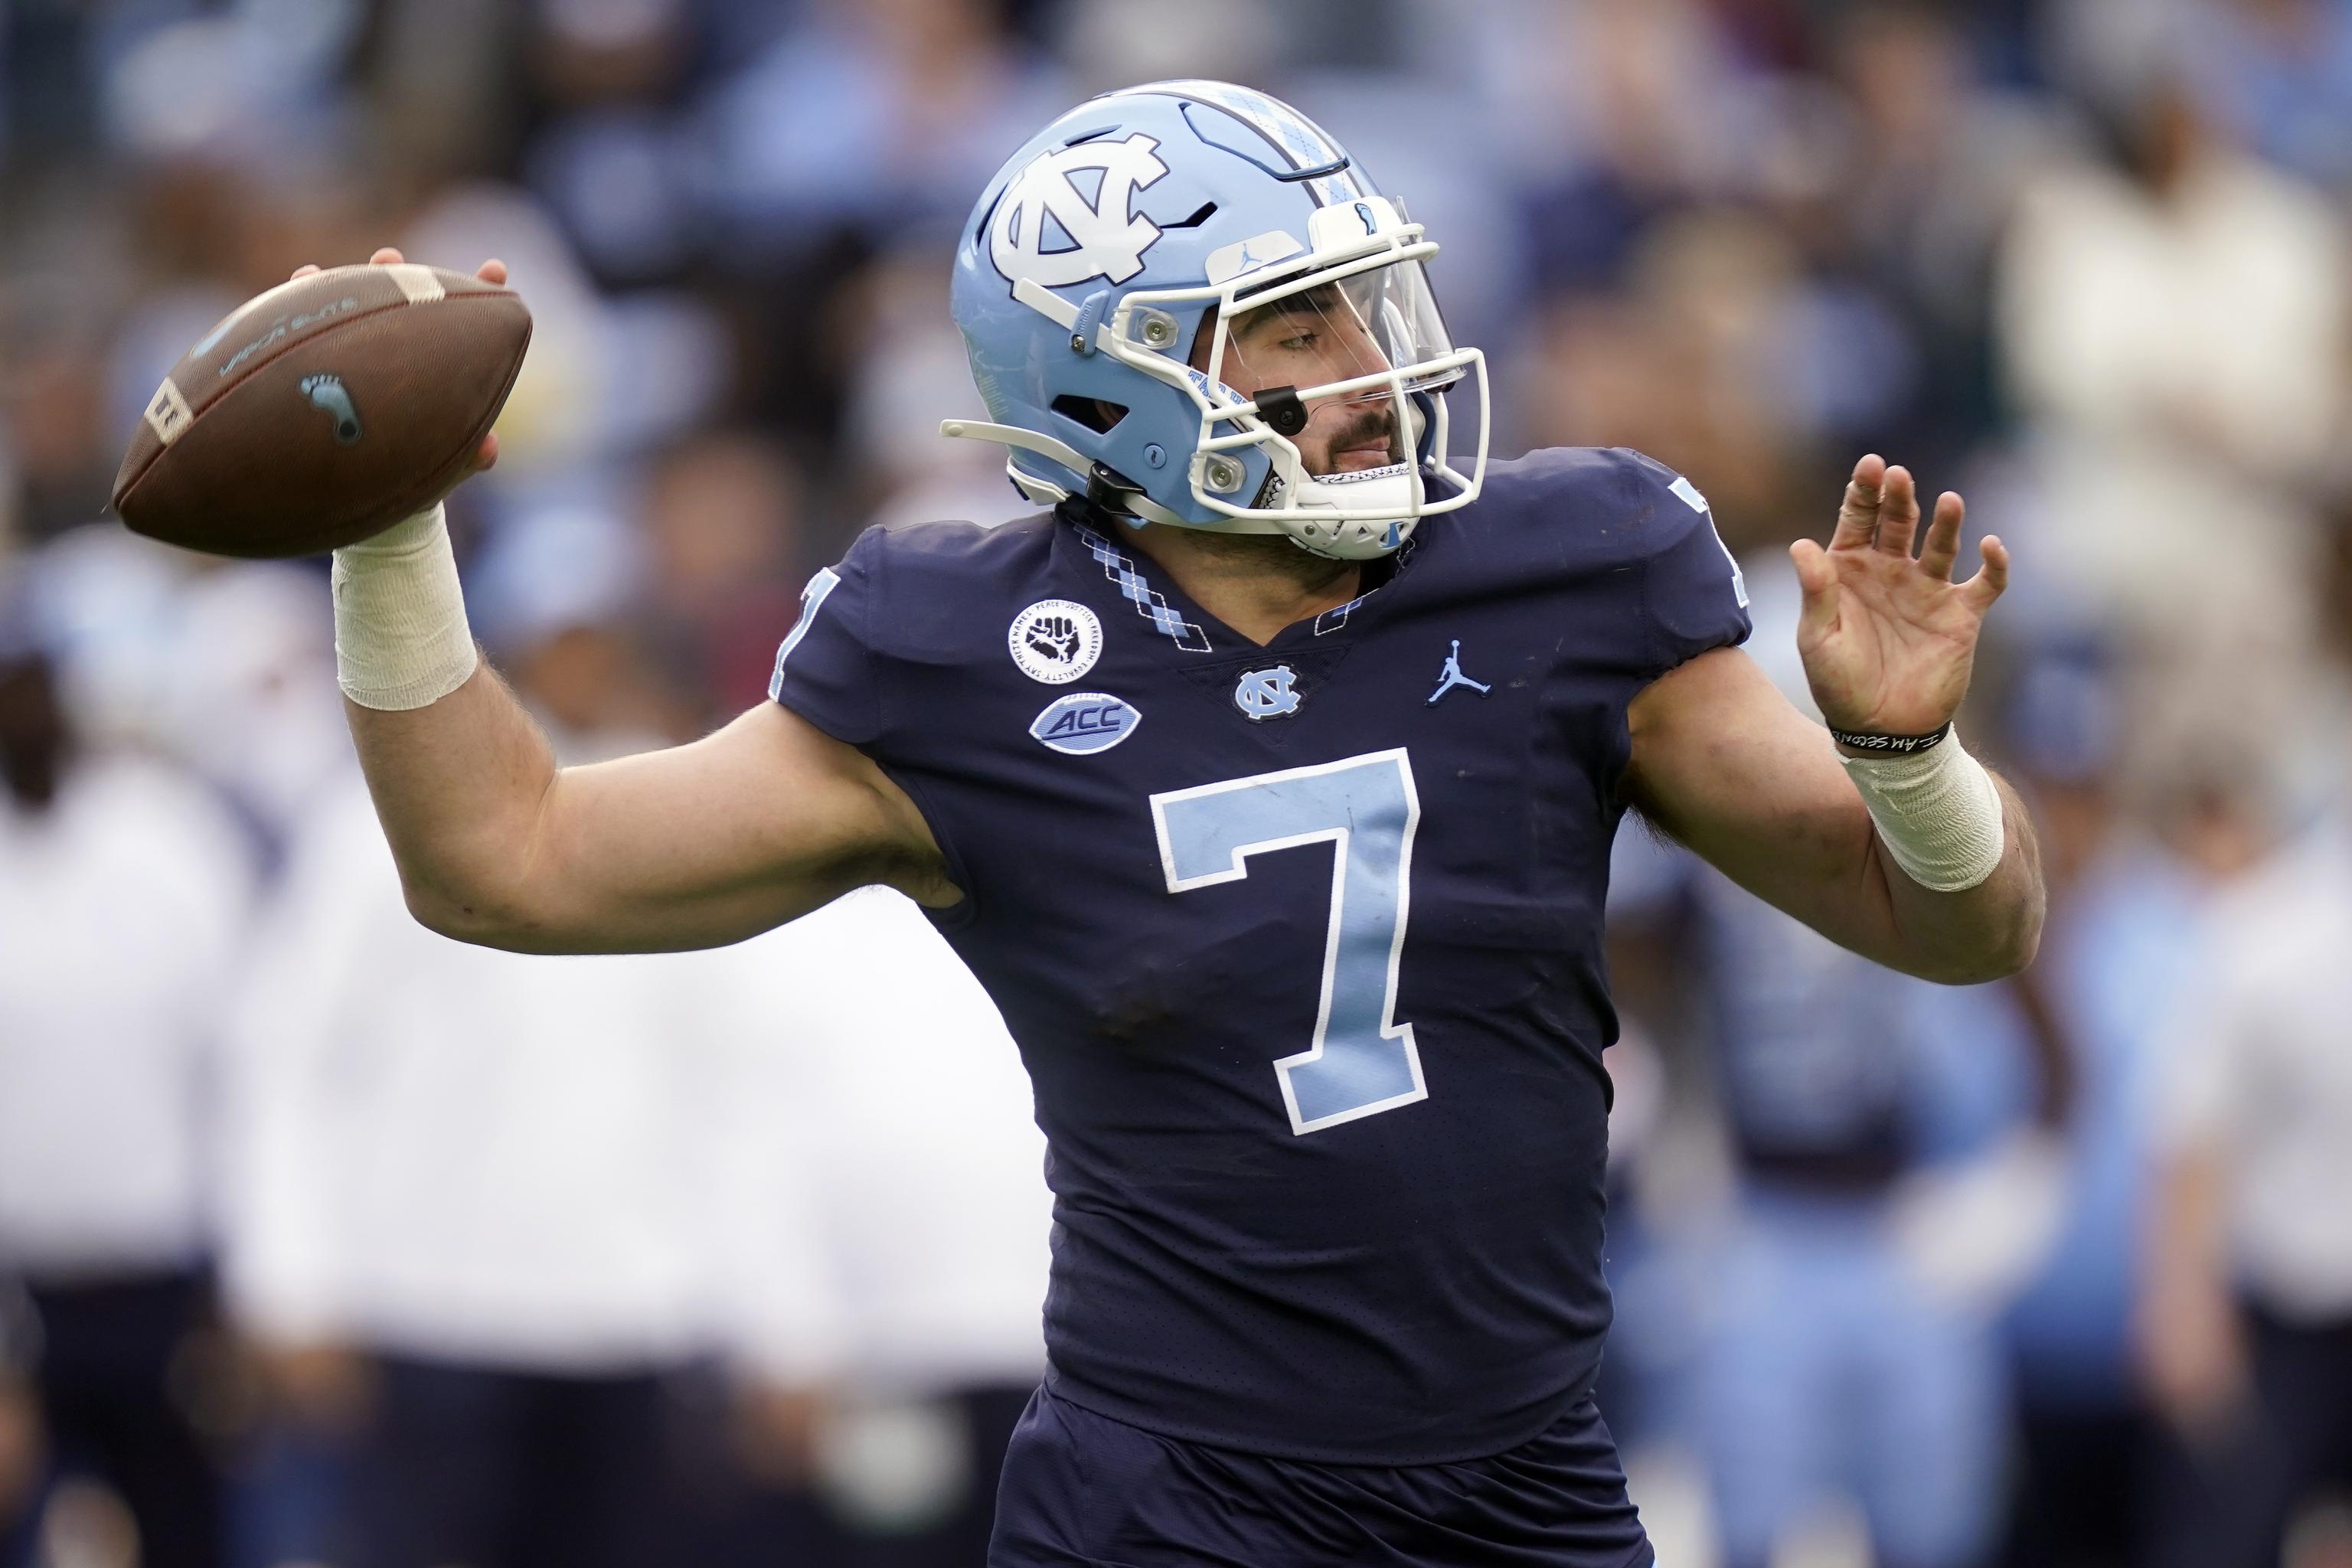 2022 NFL Draft: Pros and cons for PFF's top five quarterbacks, NFL Draft